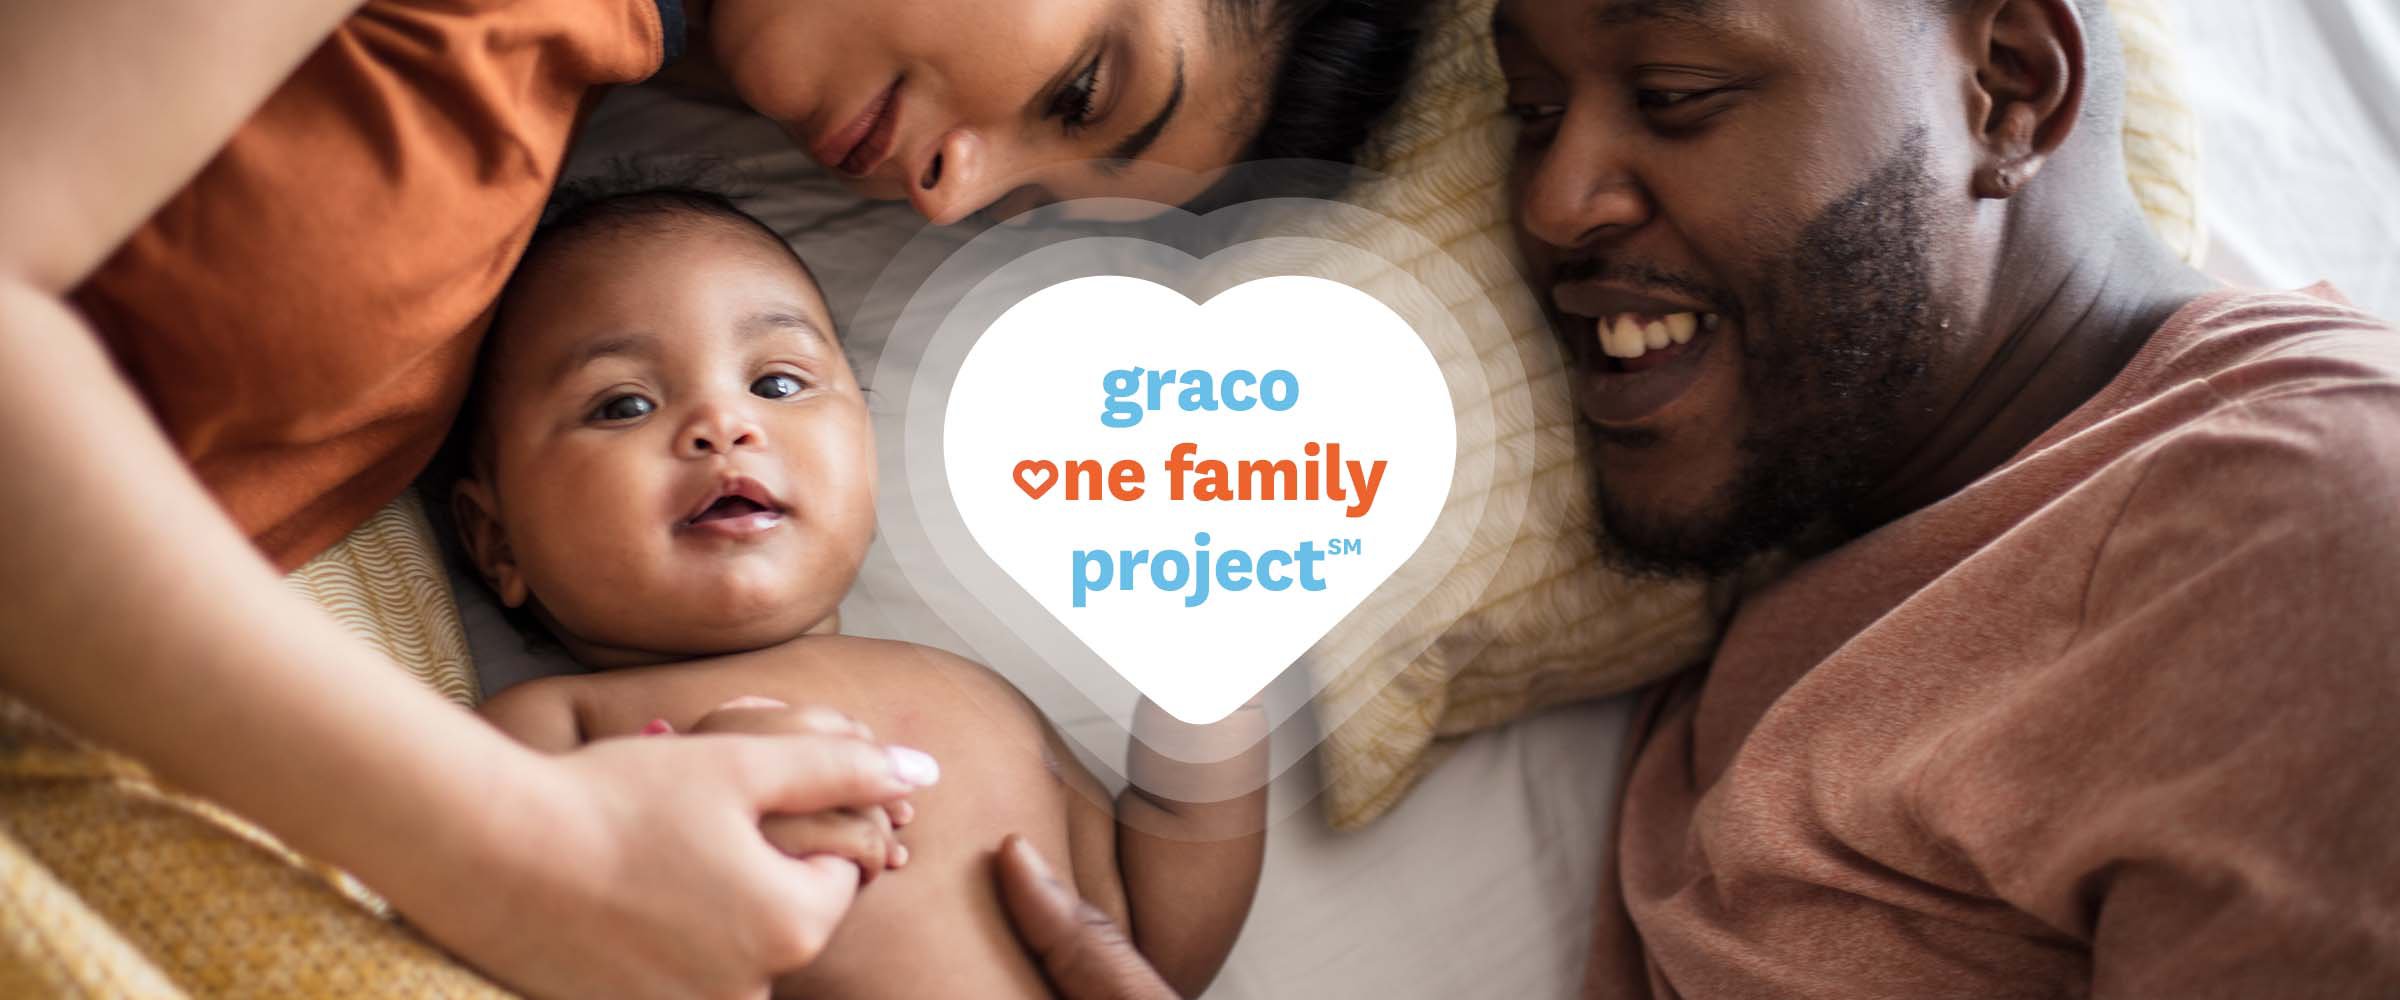 graco one family project